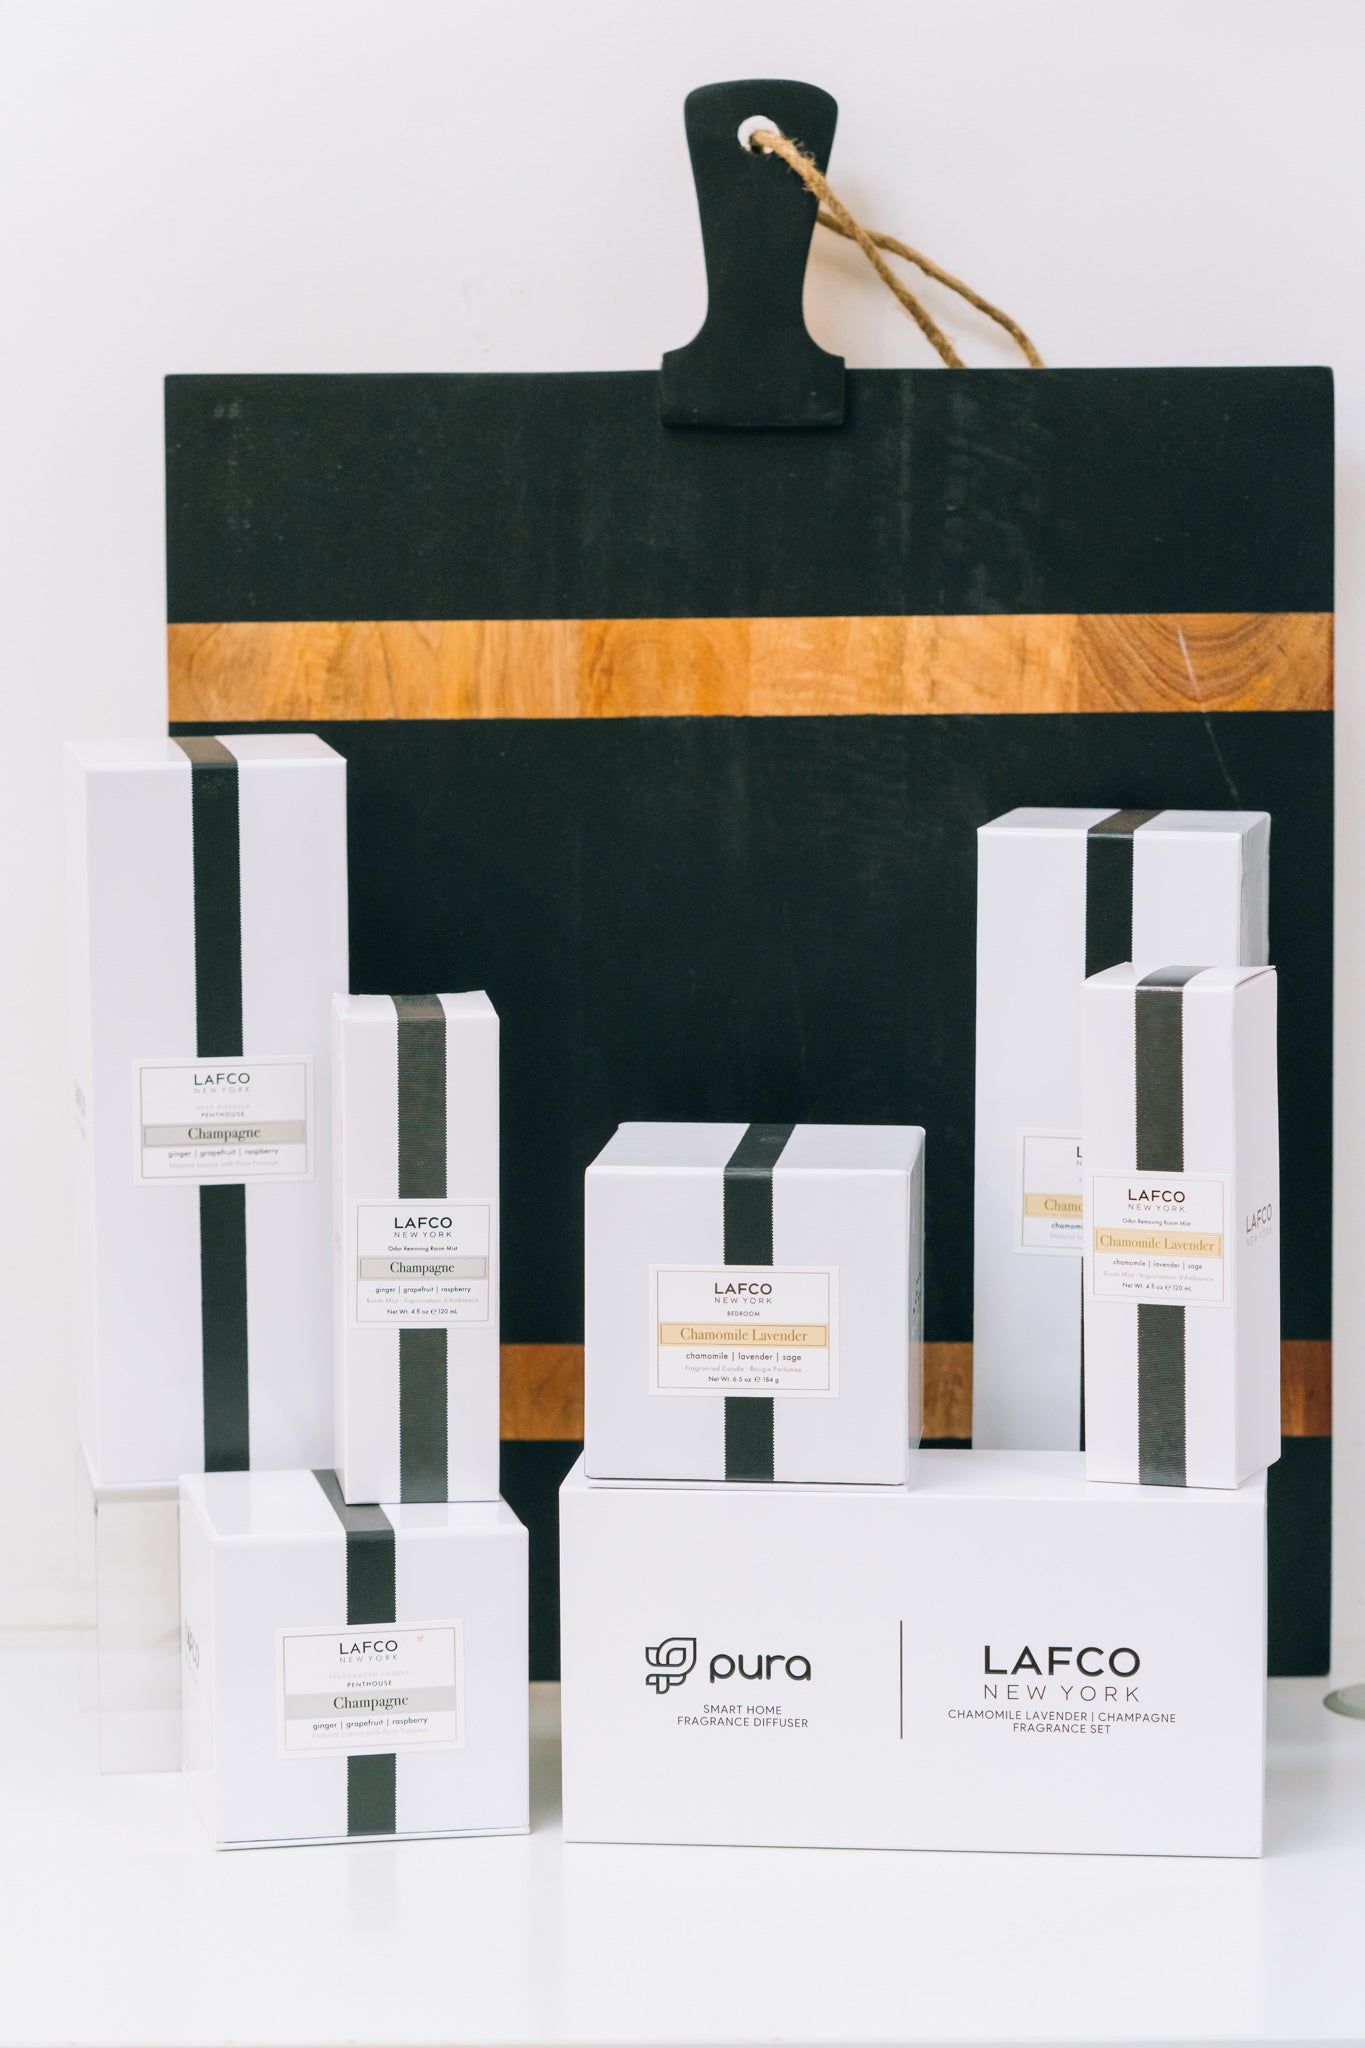 Elevate Your Senses with LAFCO New York's Candles Artful Fragrance Experience